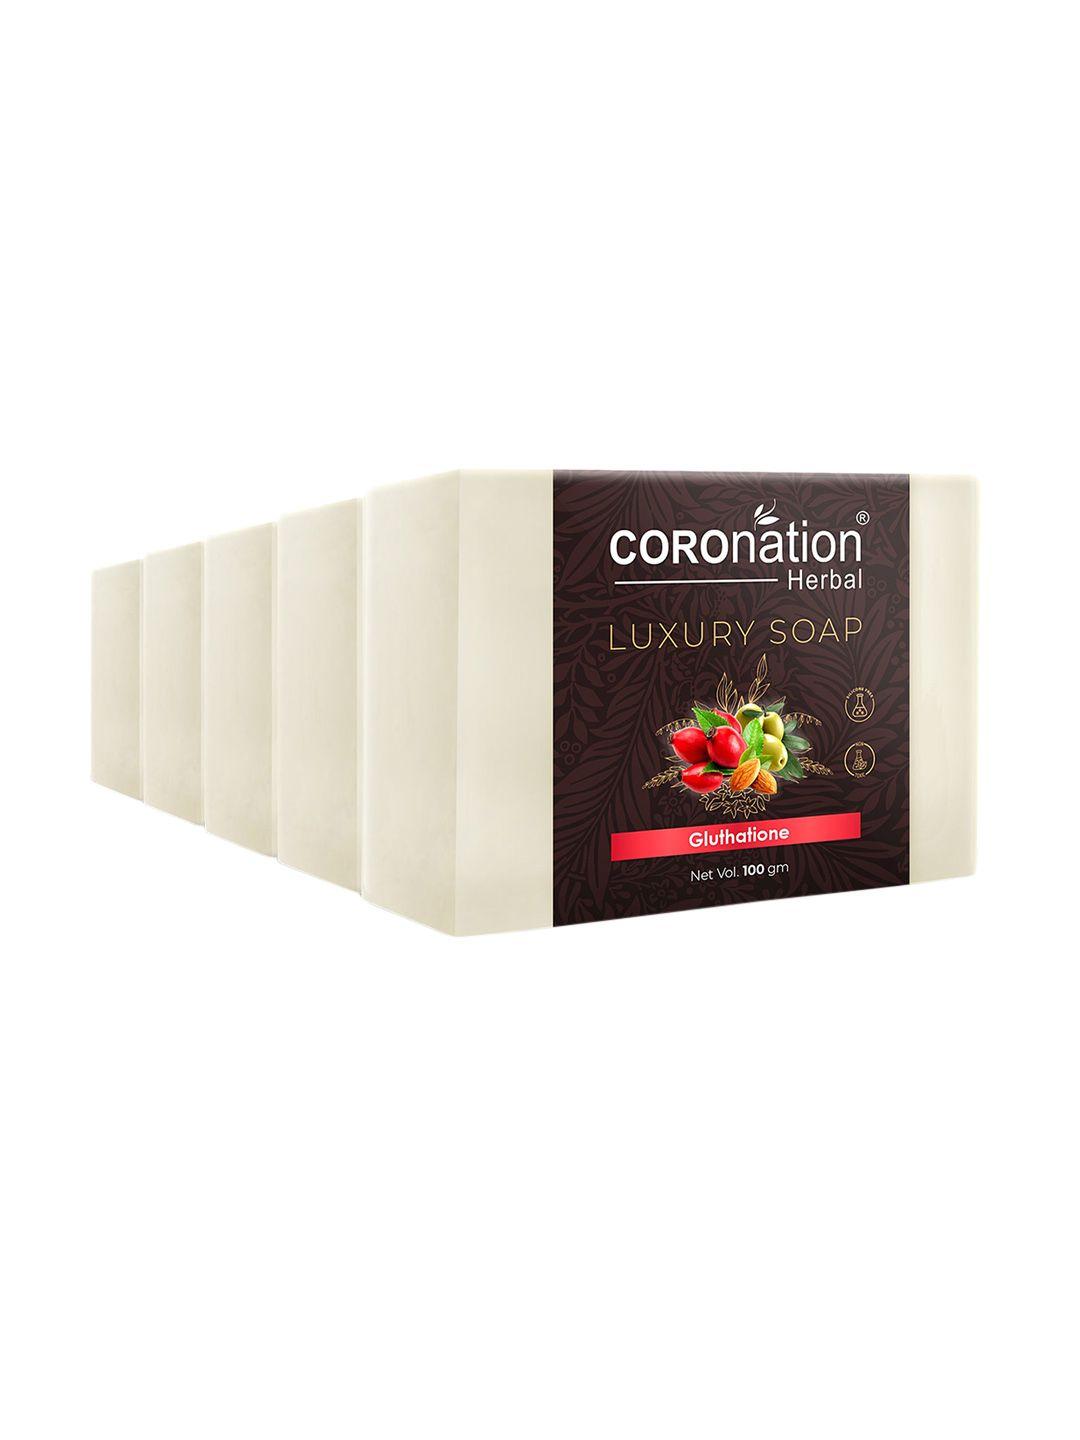 coronation herbal set of 5 gluthatione luxury soap - 100 g each